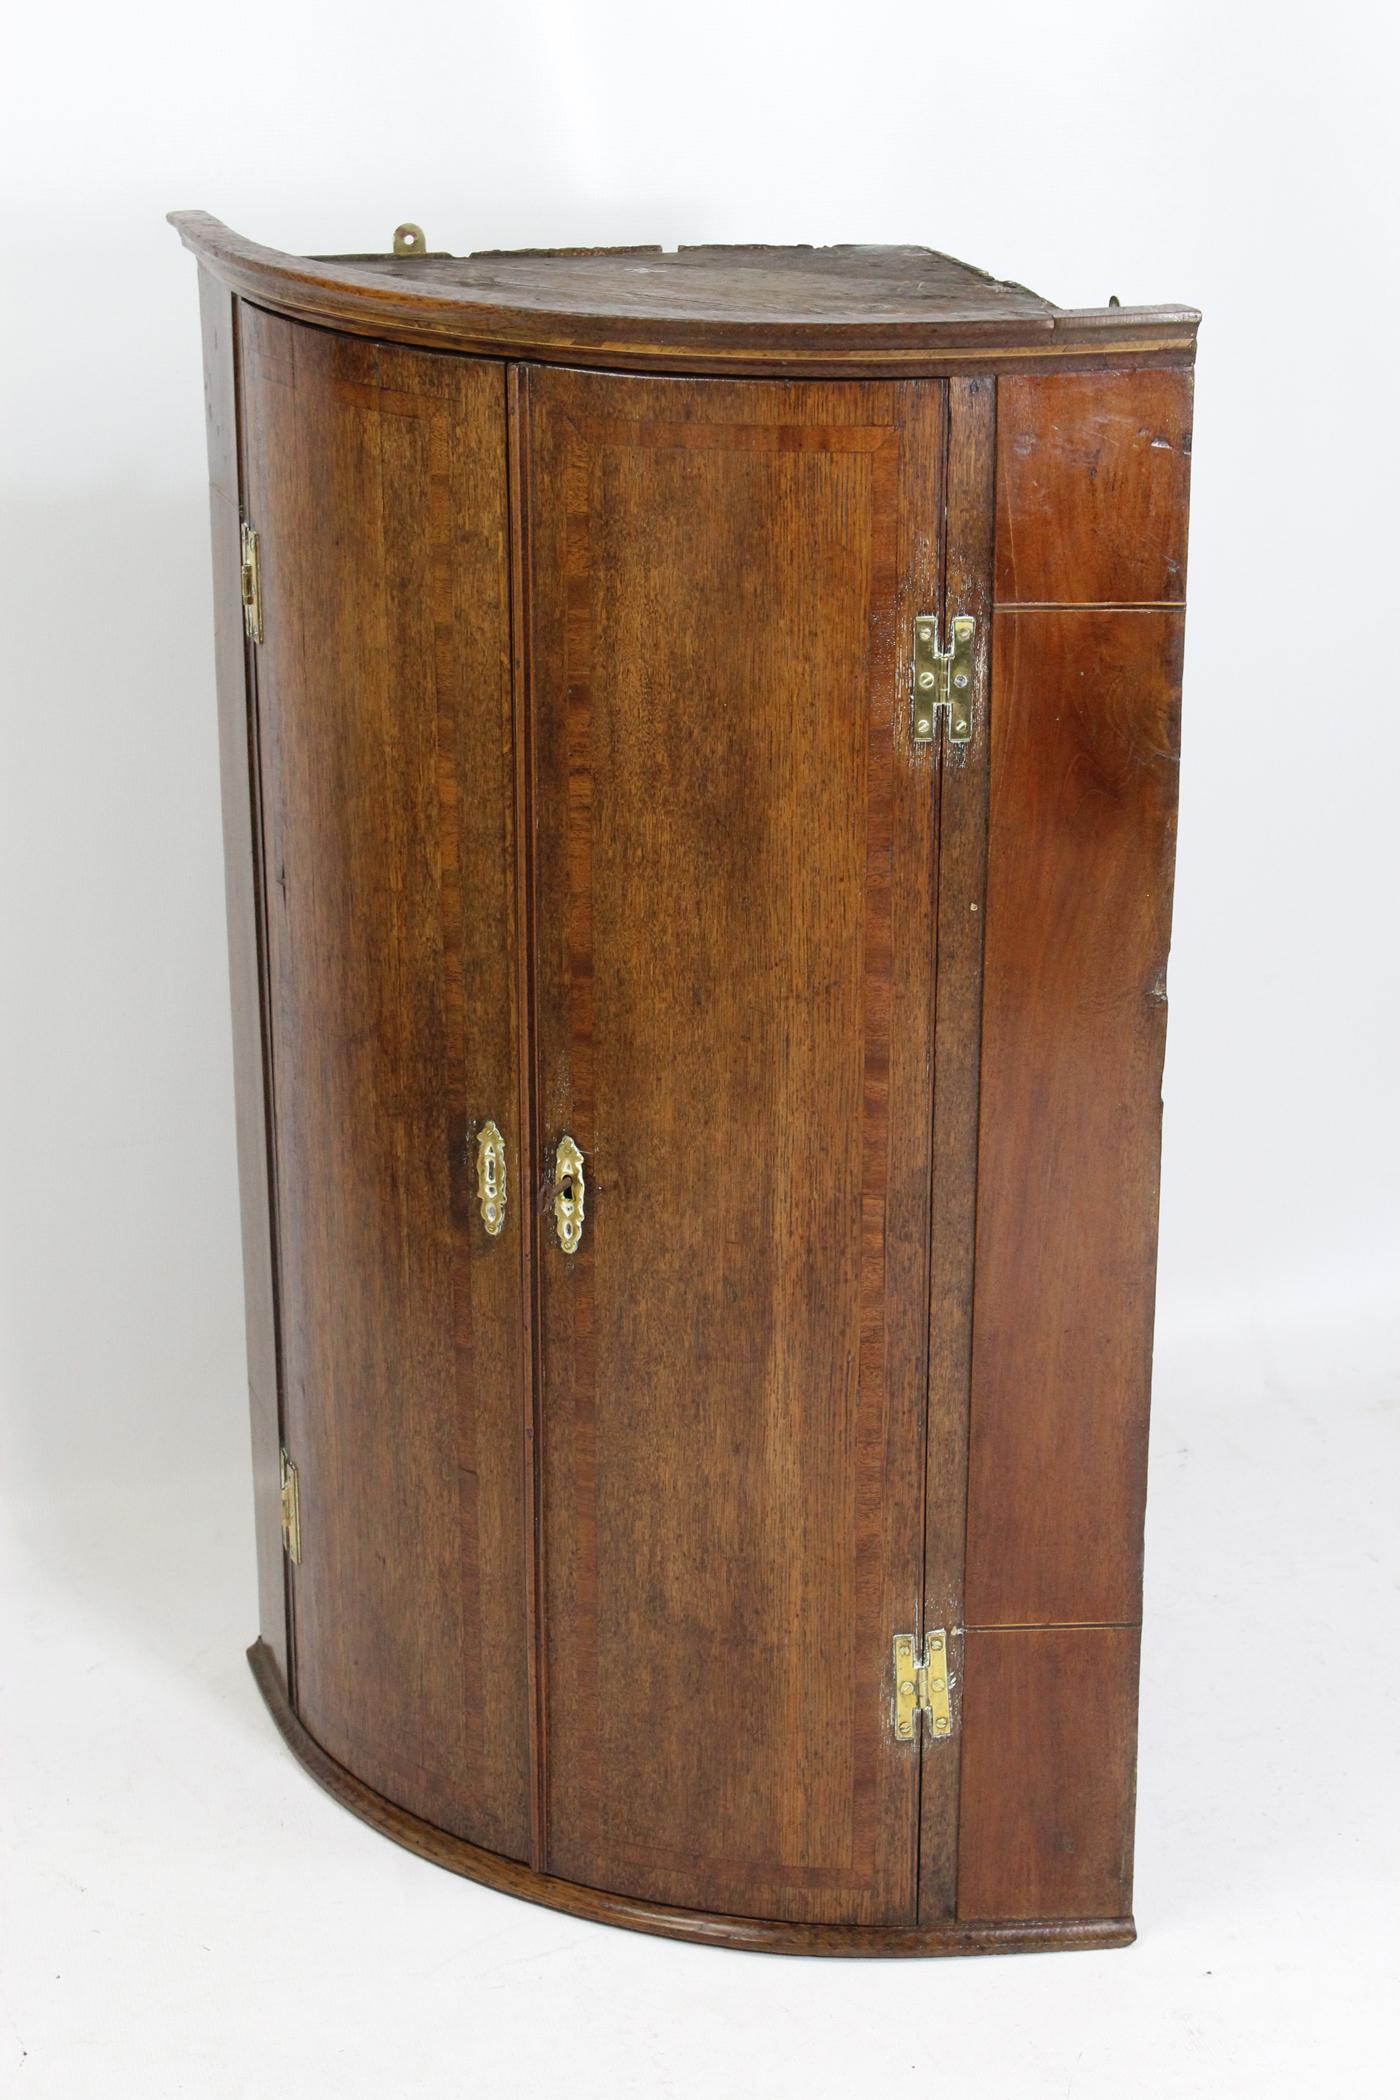 An attractive antique George III oak corner cupboard with barrel front with mahogany, satinwood and ebony banding dating from the late 18th century. It has attractive brass escutcheons and H hinges and comes with lock and working key. The twin doors